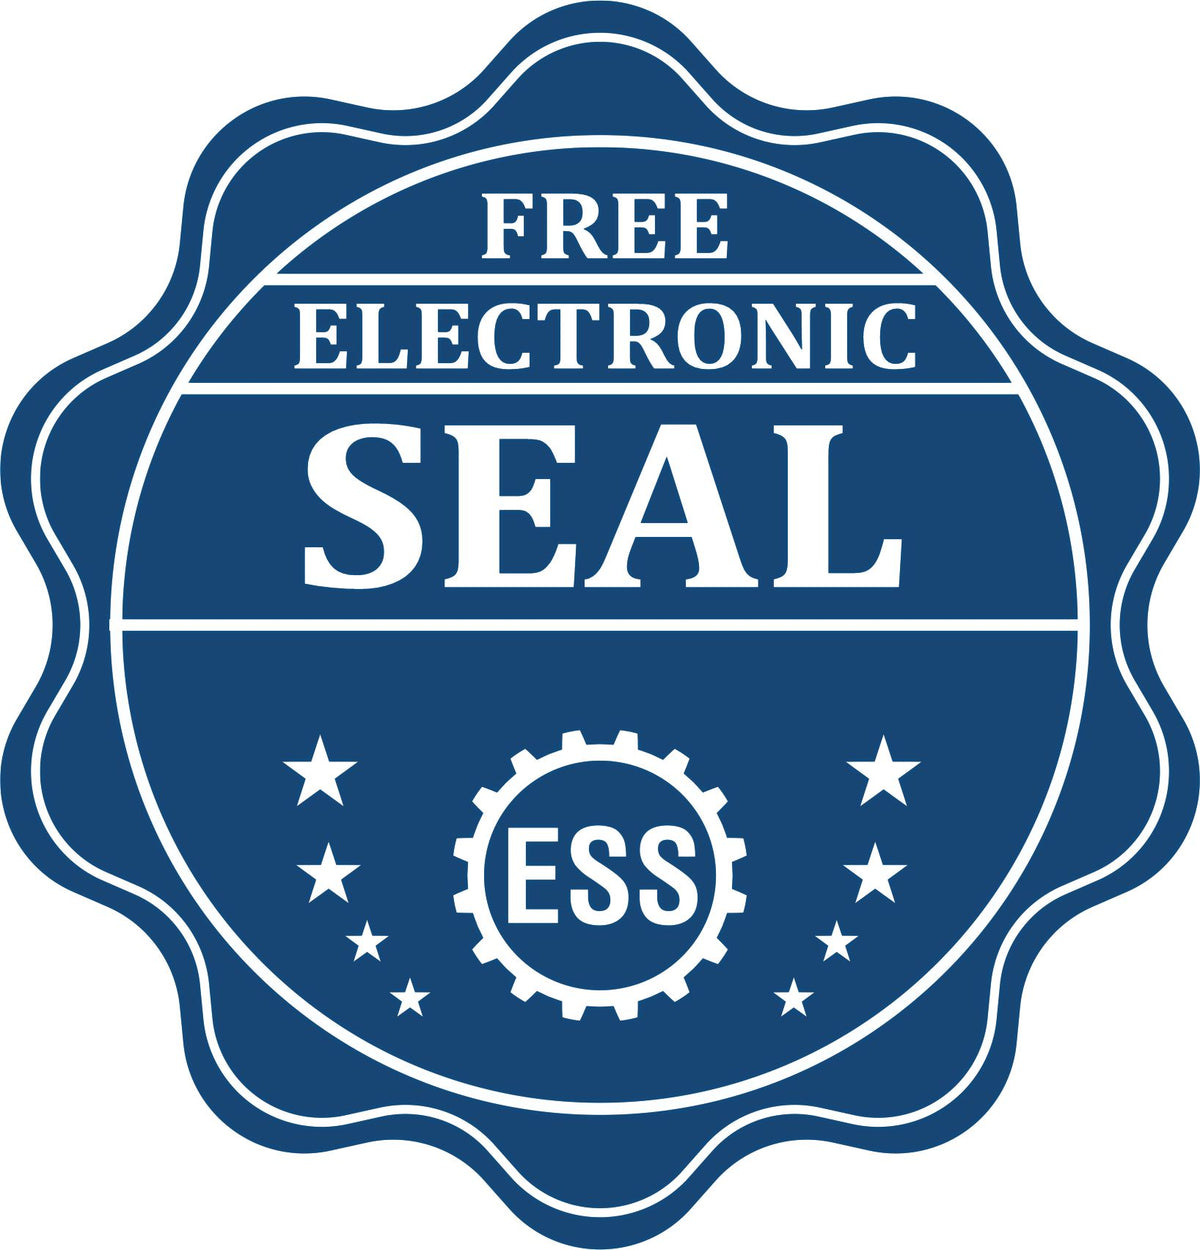 A badge showing a free electronic seal for the State of Tennessee Extended Long Reach Engineer Seal with stars and the ESS gear on the emblem.